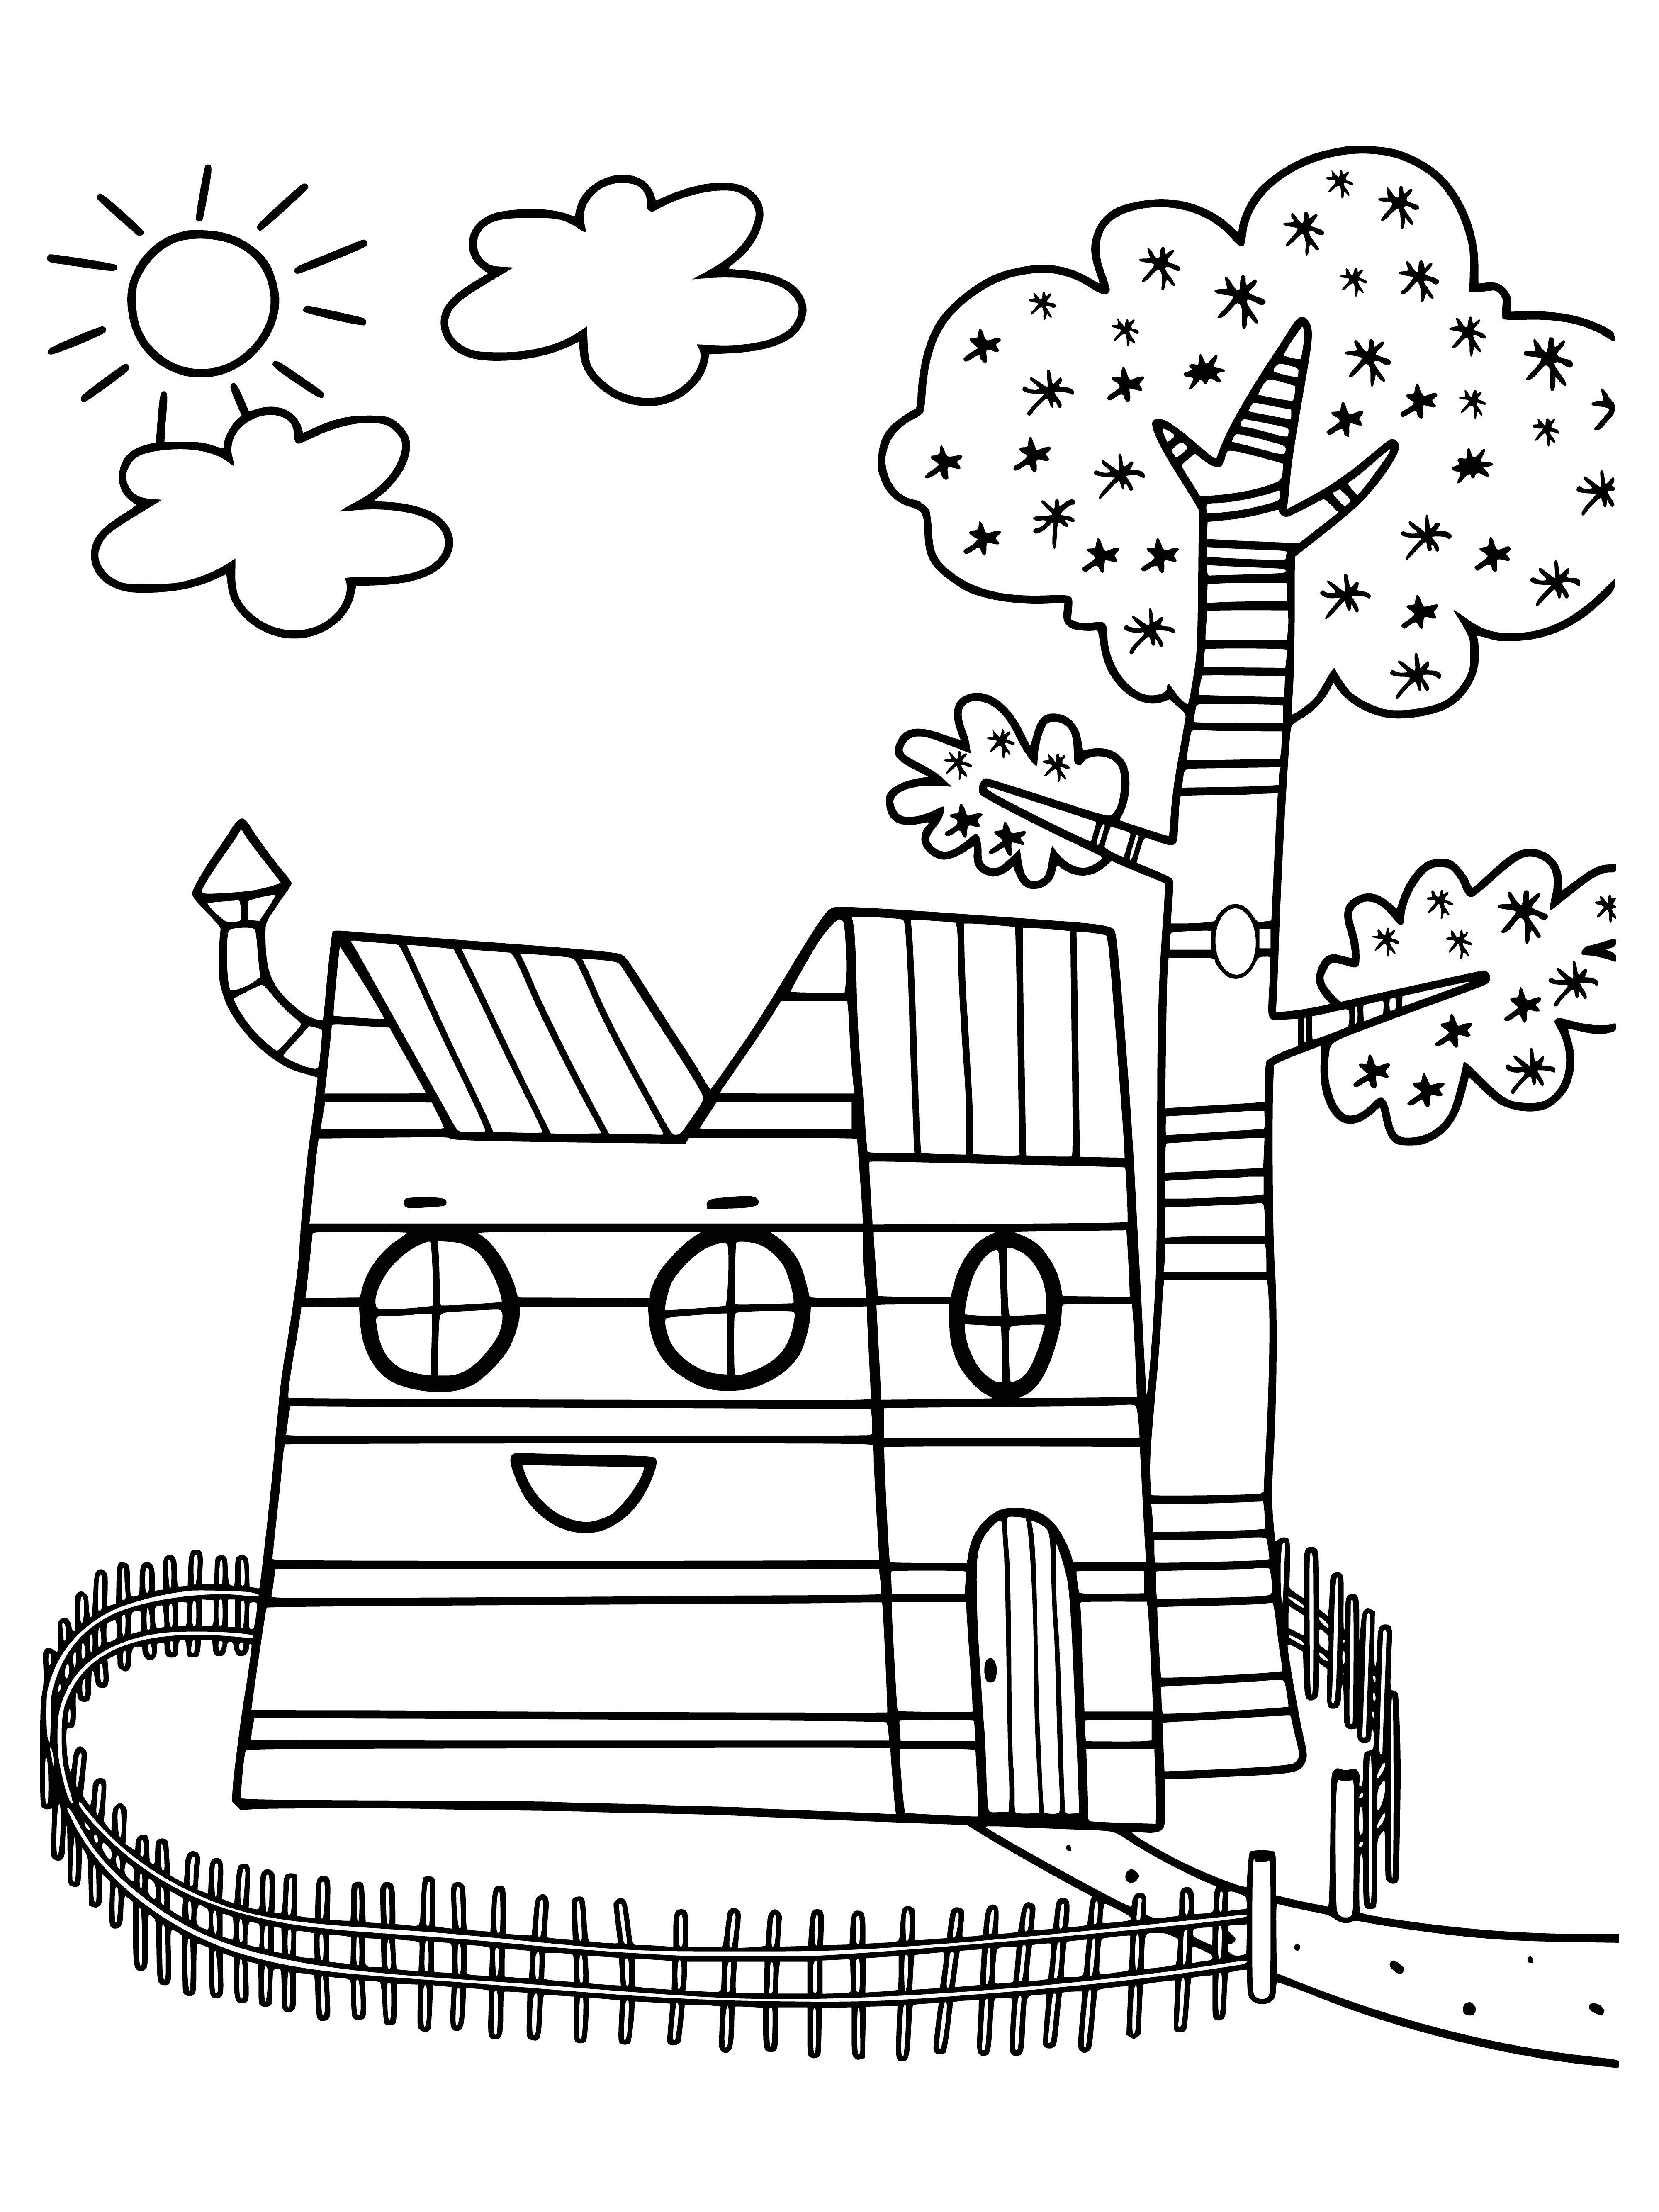 coloring page: 3 cats cohabit a home: 1 sleeping in a bed, 2 playing with a toy on the ground, all with different colored fur.